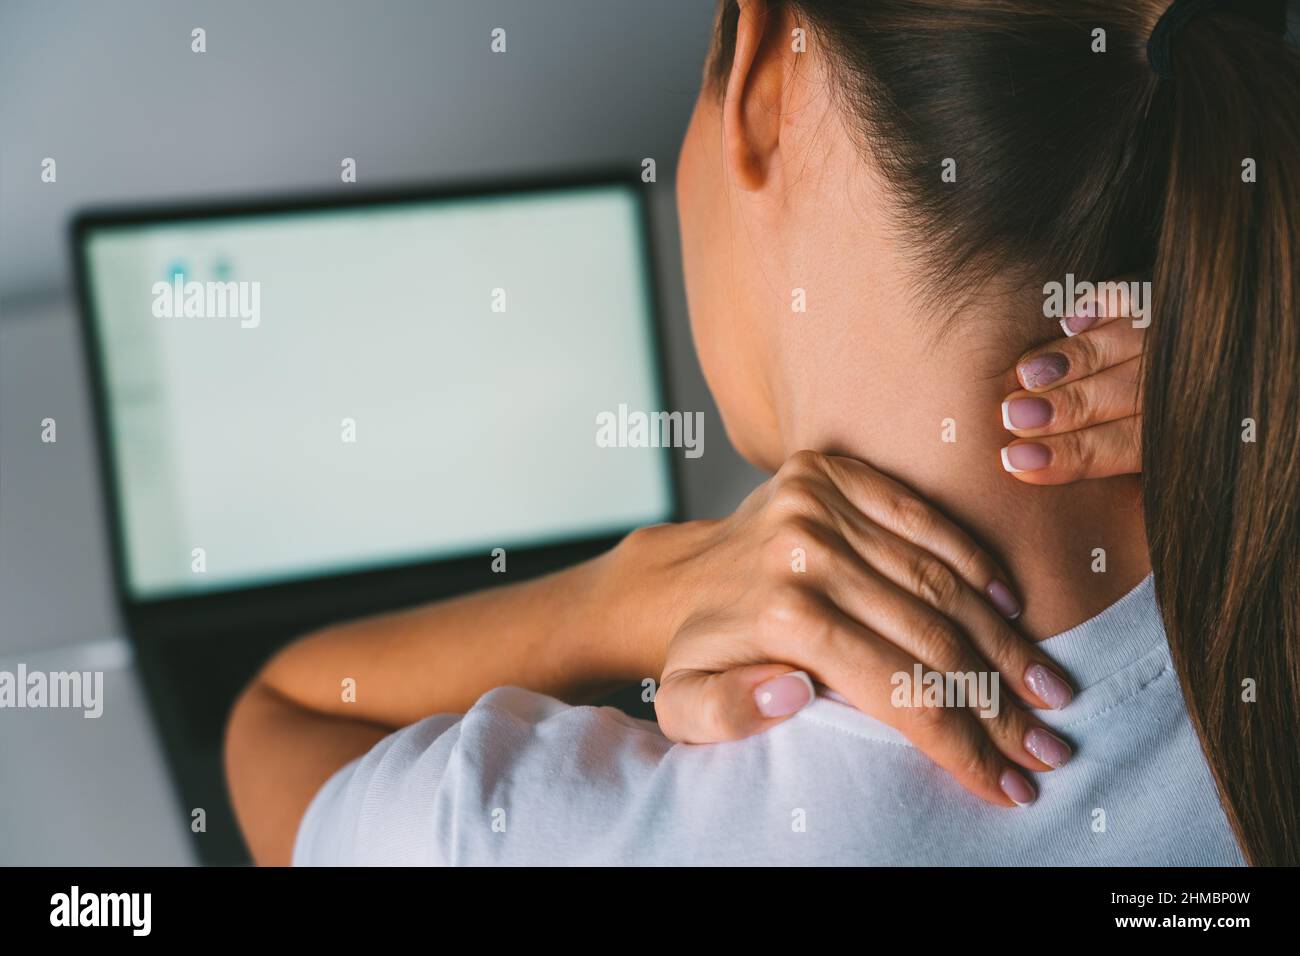 Neck pain after working on laptop or computer. Young woman massaging neck to relieve pain after working on pc Stock Photo